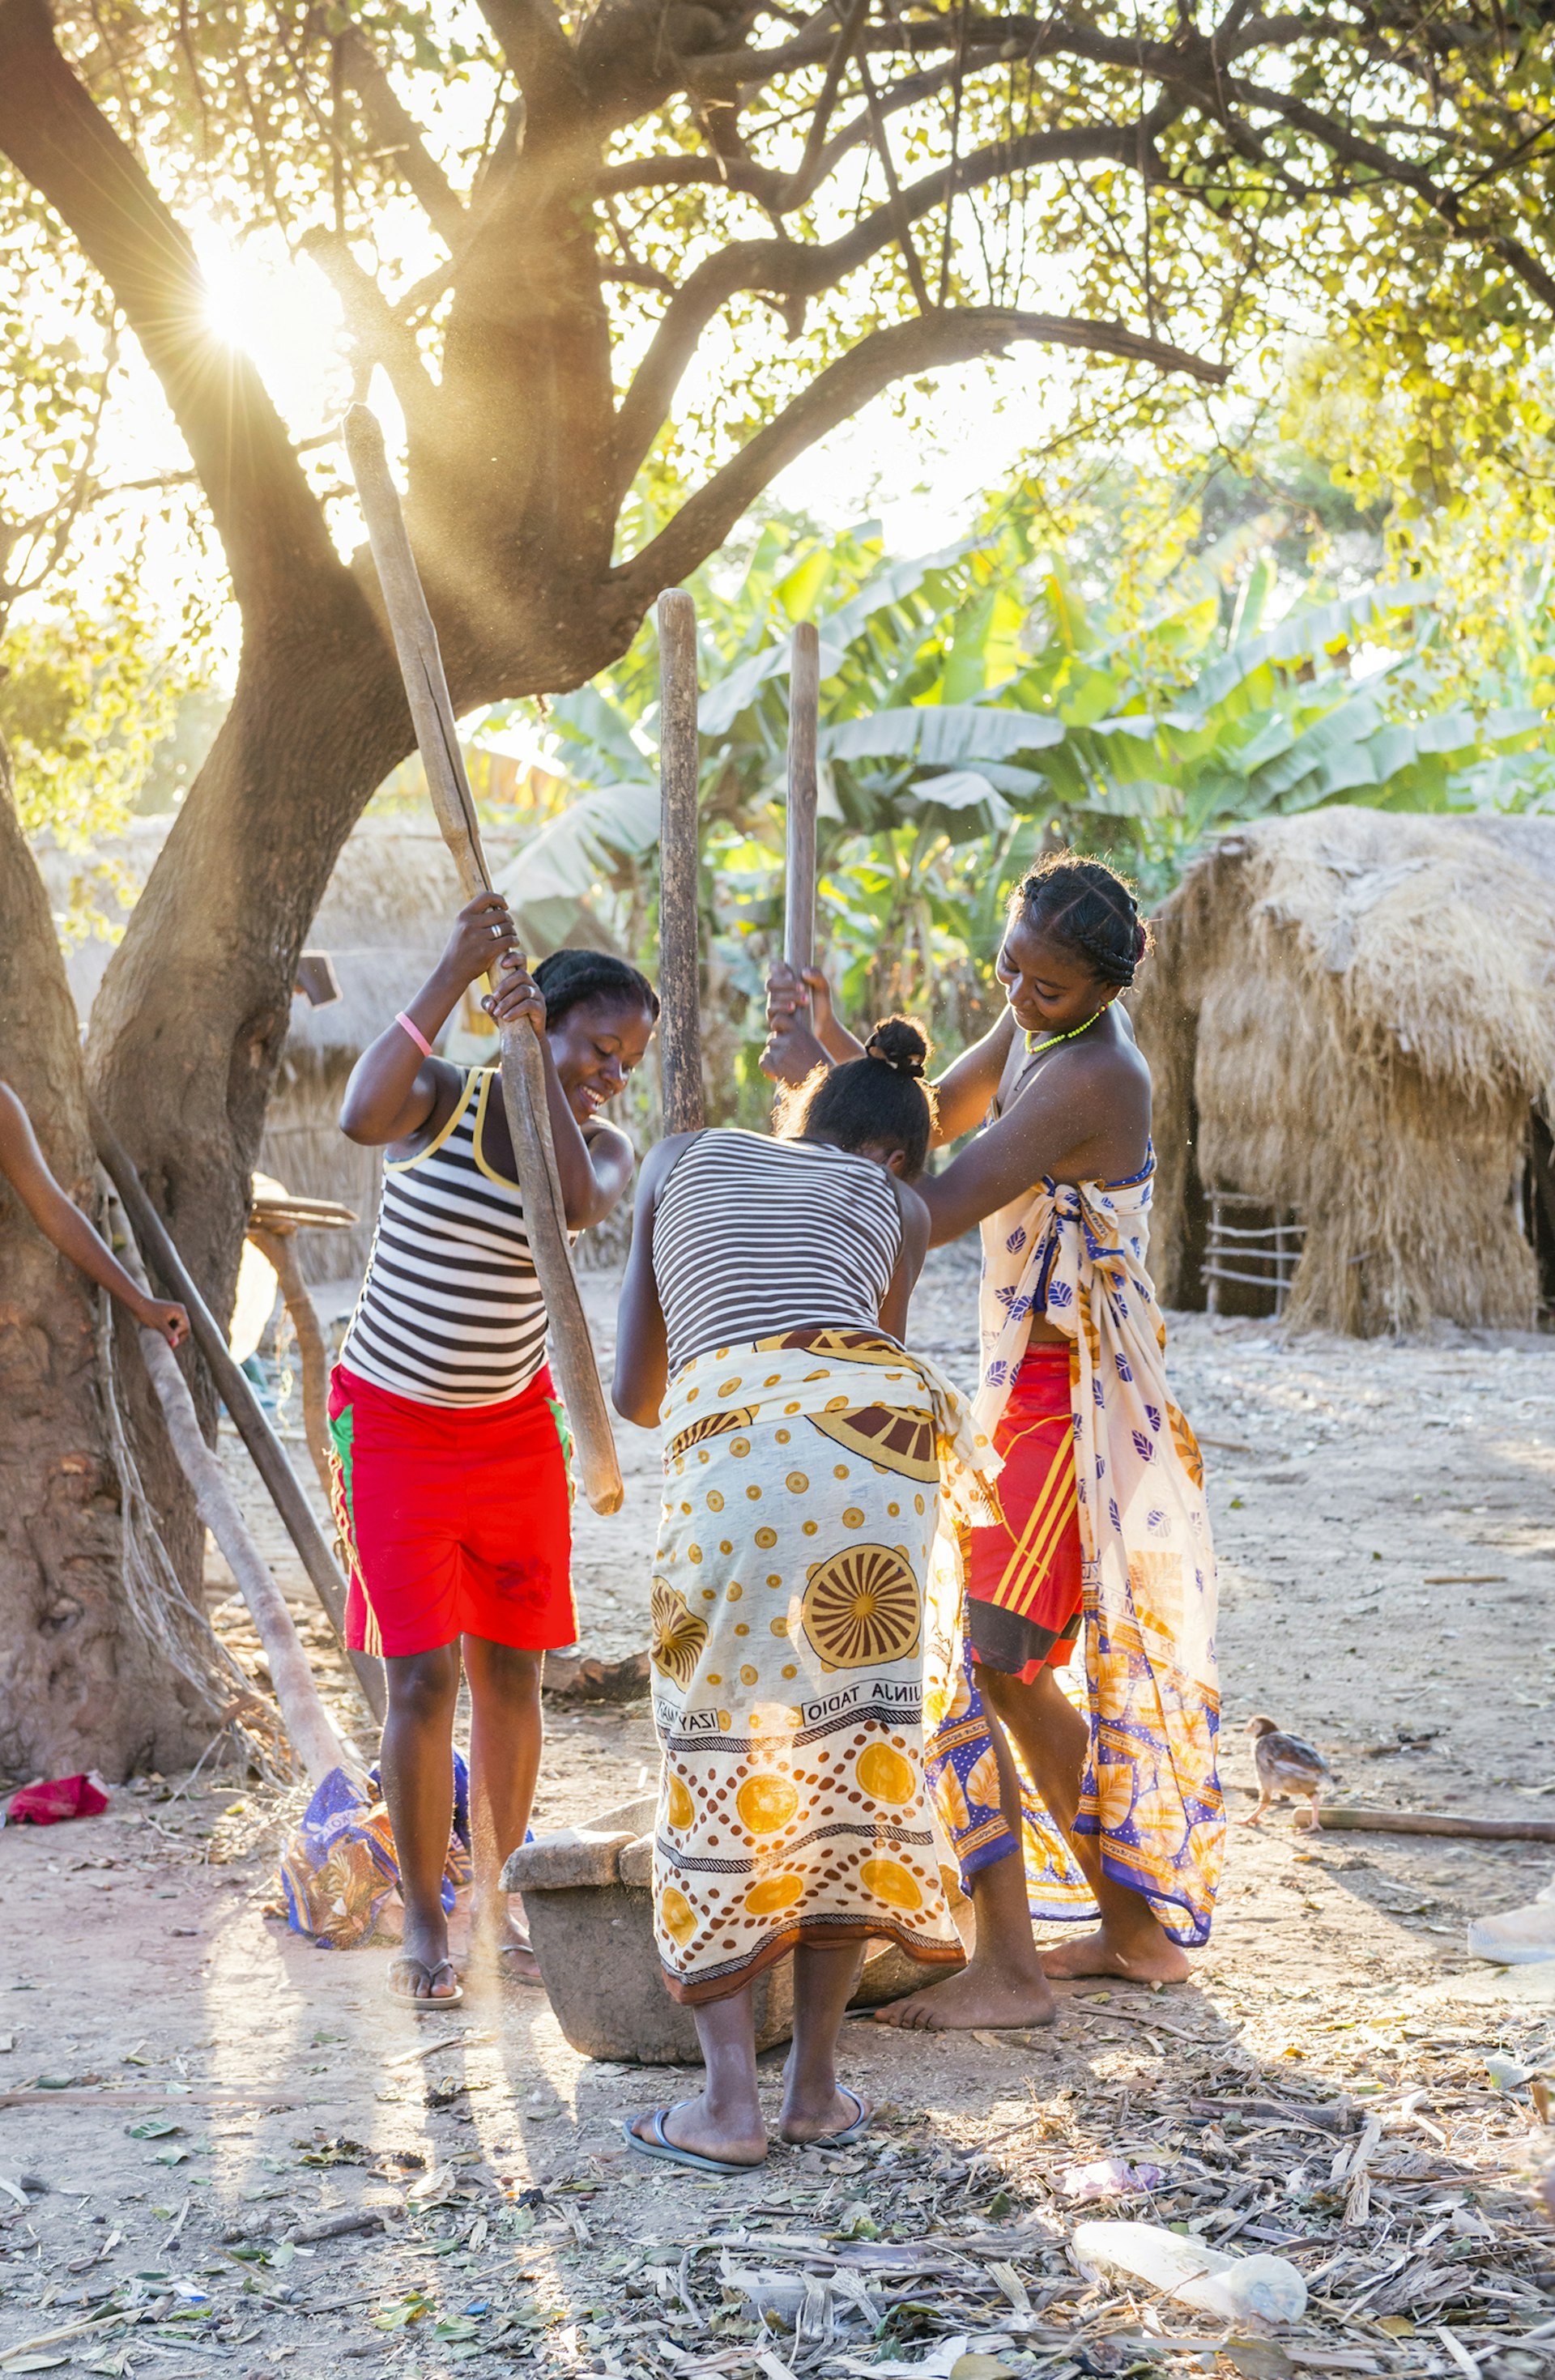 Women pounding rice in a village along the 8a road © Justin Foulkes / Lonely Planet 